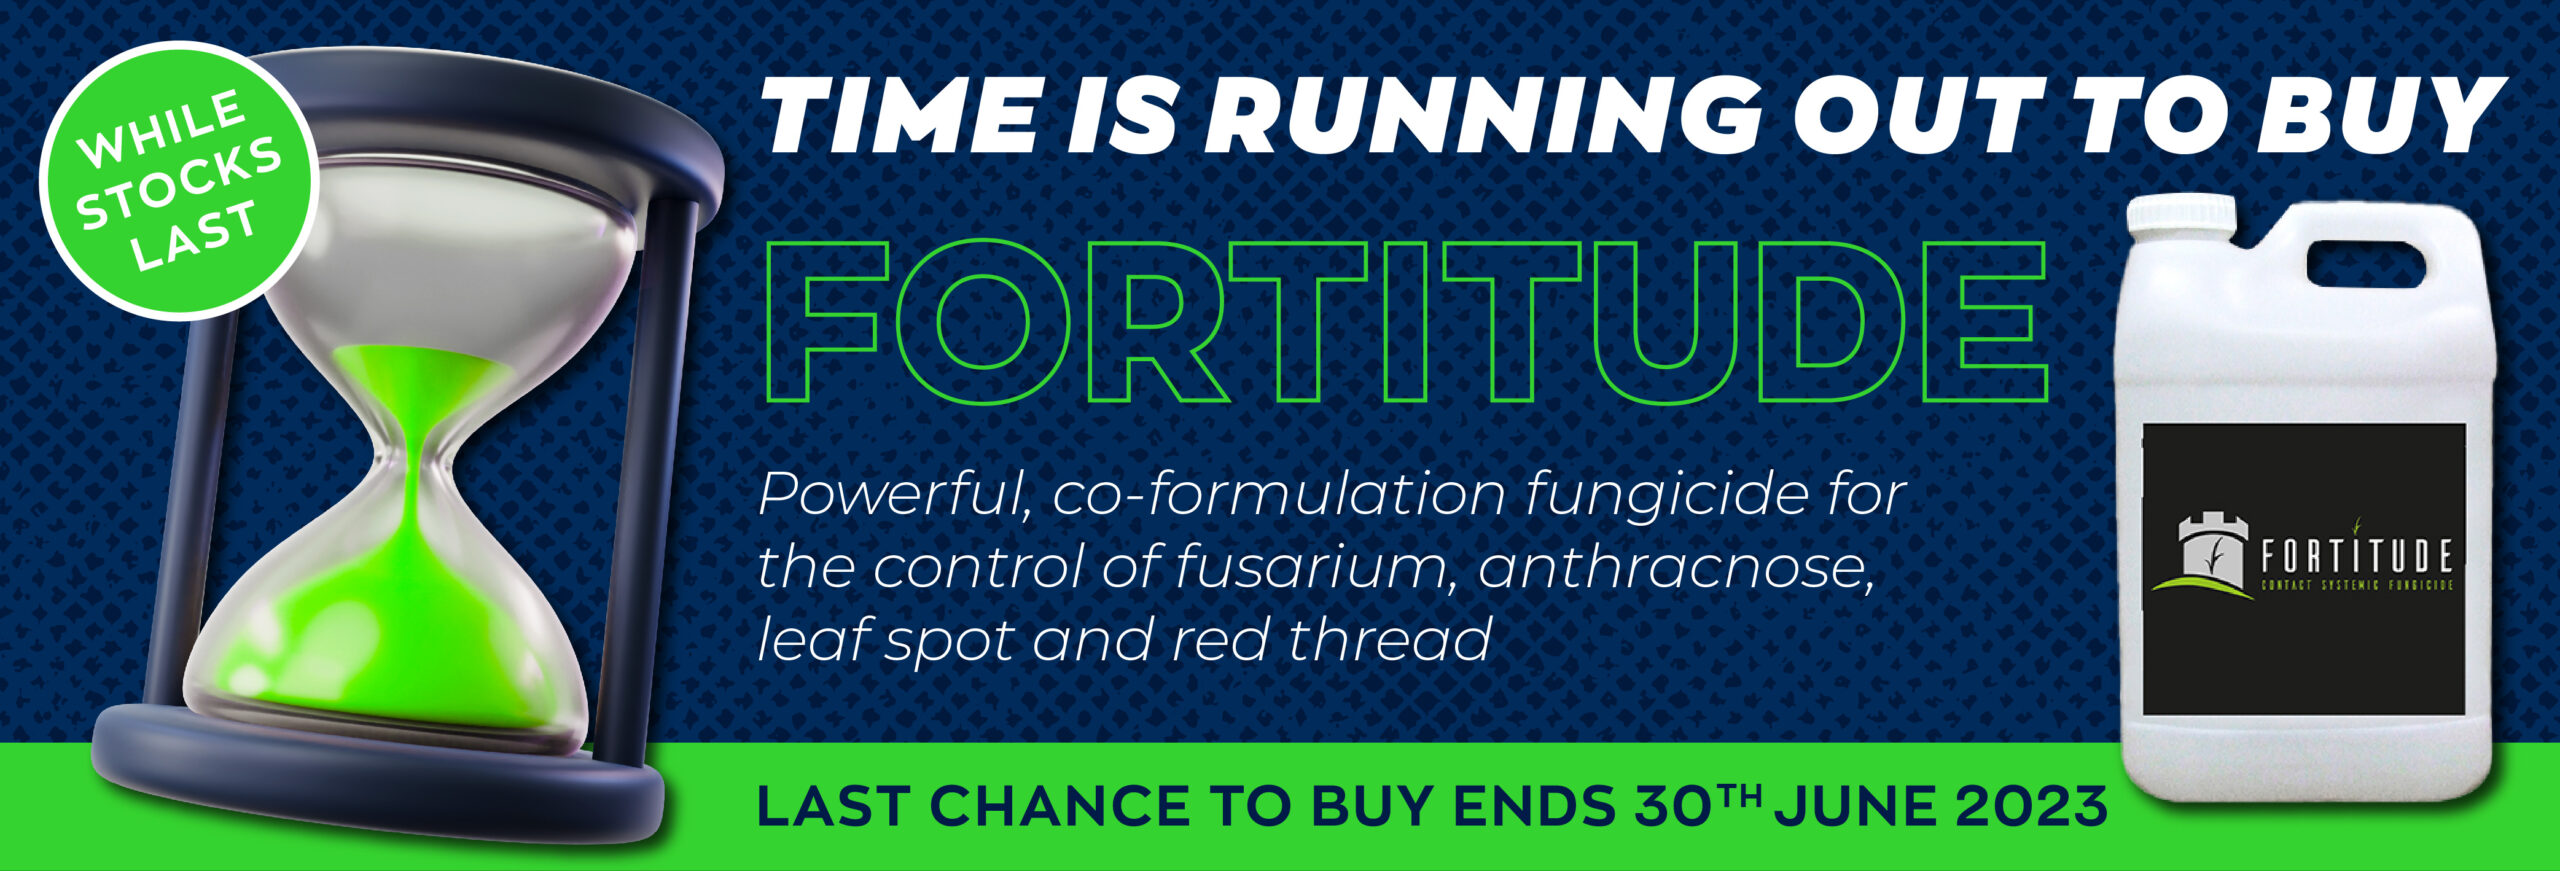 Time is running out to buy Fortitude